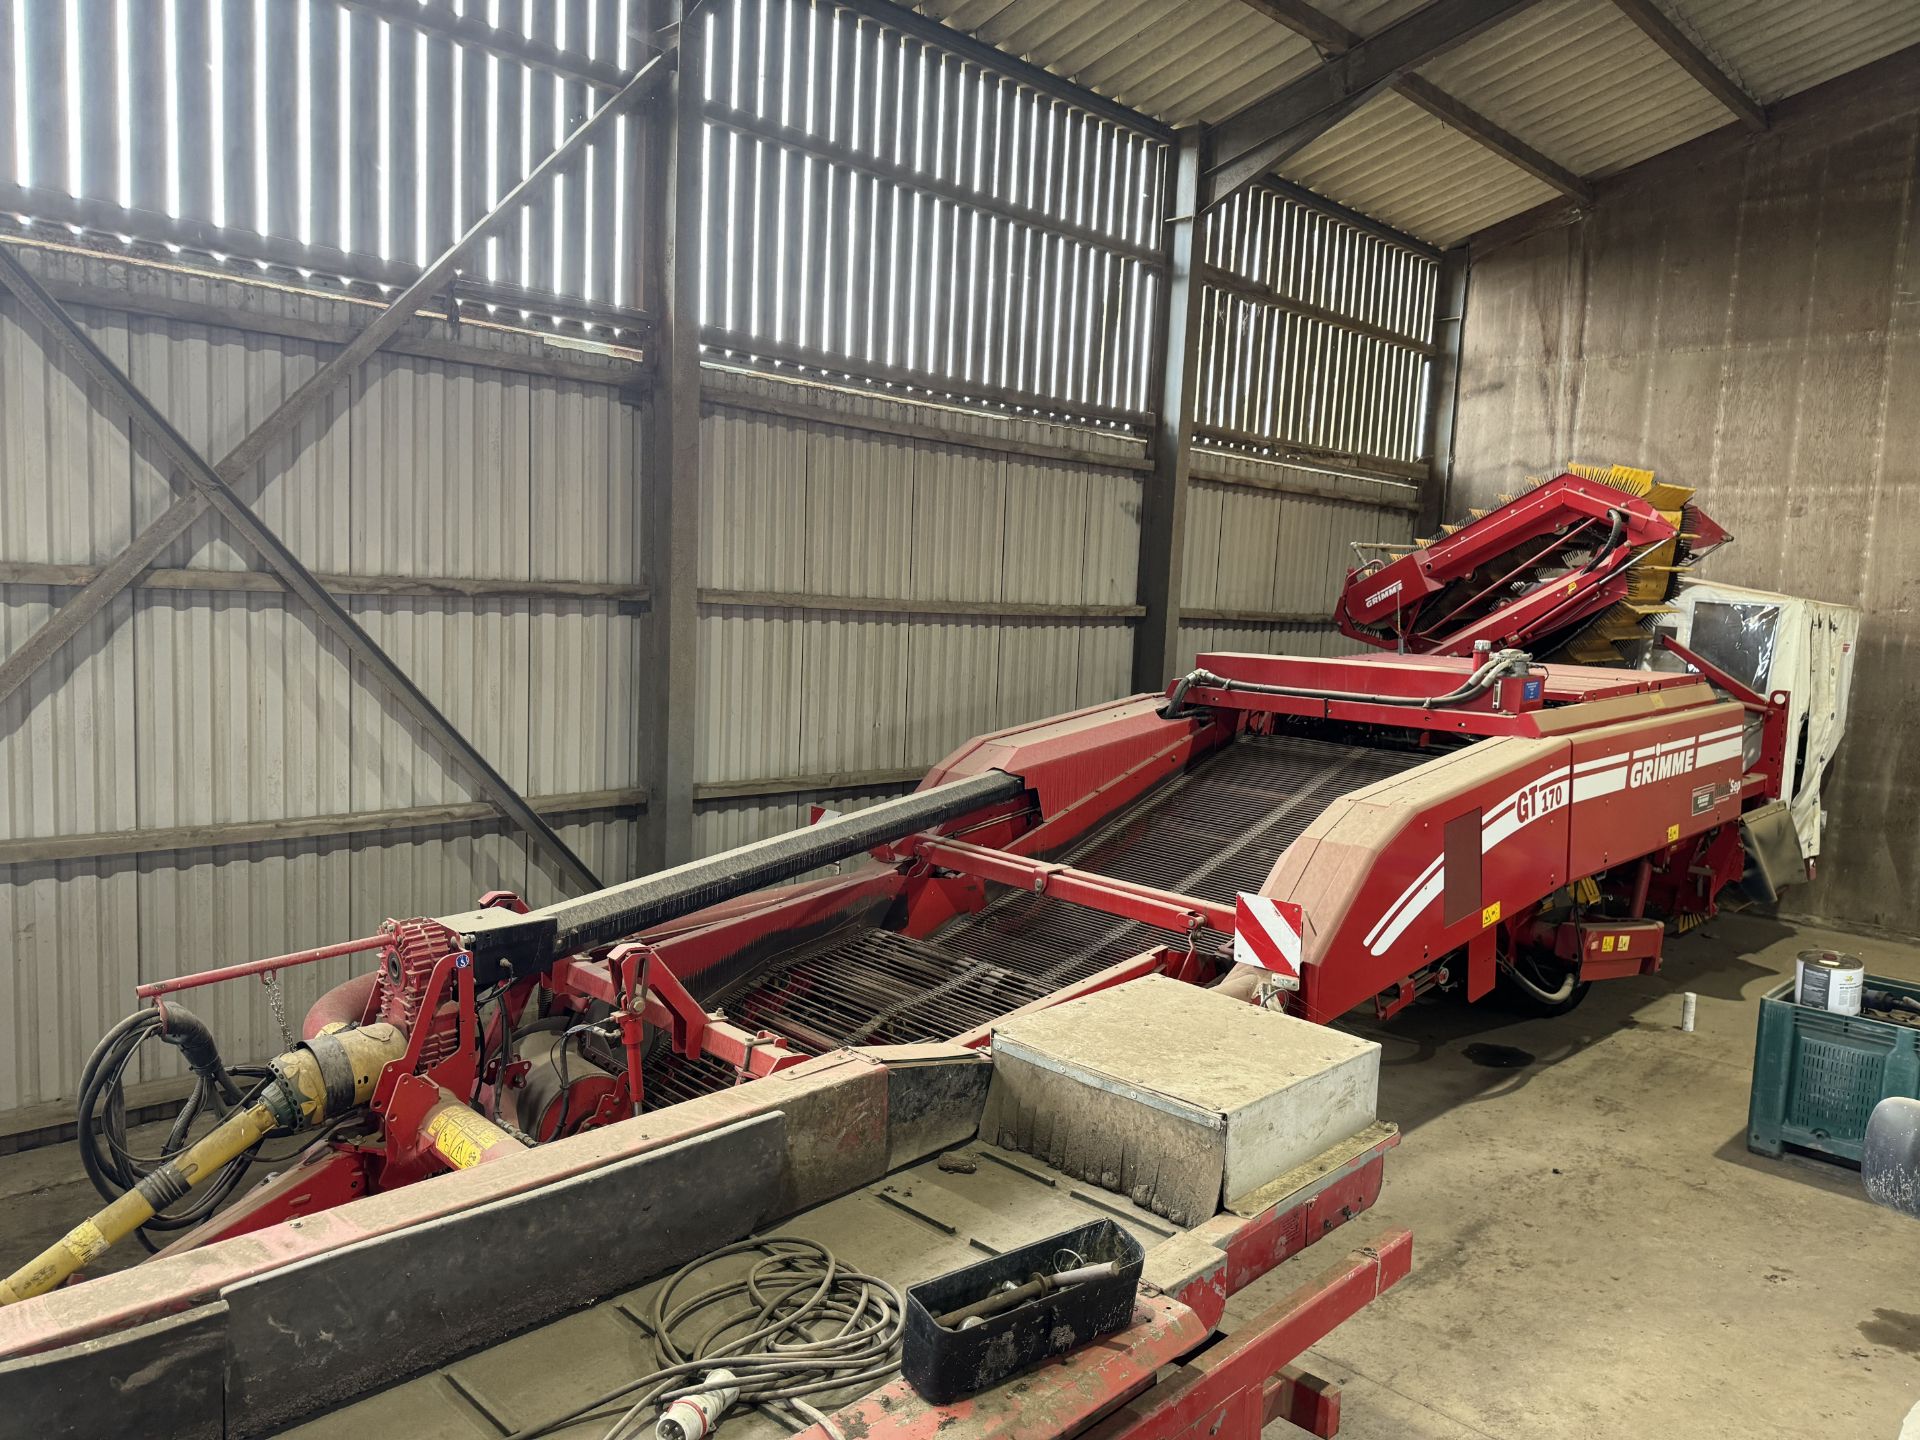 (11) Grimme GT170 Multi Sep 2 row potato harvester, wheel drive, canopy, control box with screen & - Image 2 of 6